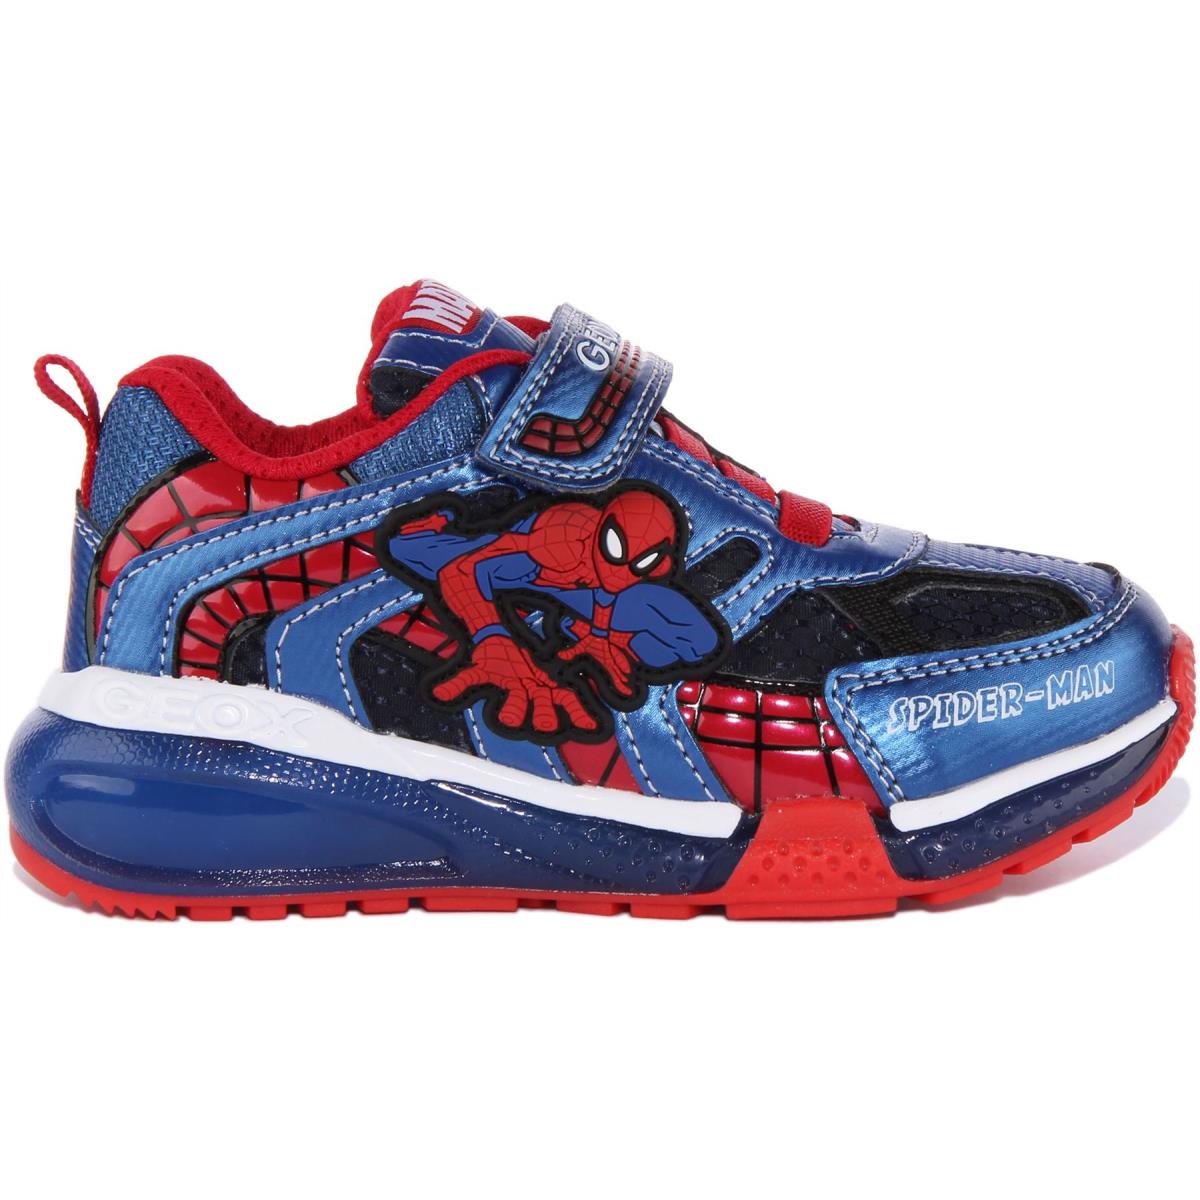 Geox J Bayonce Kids Light Up Spiderman Sneakers In Navy Red Size US 1C - 4Y